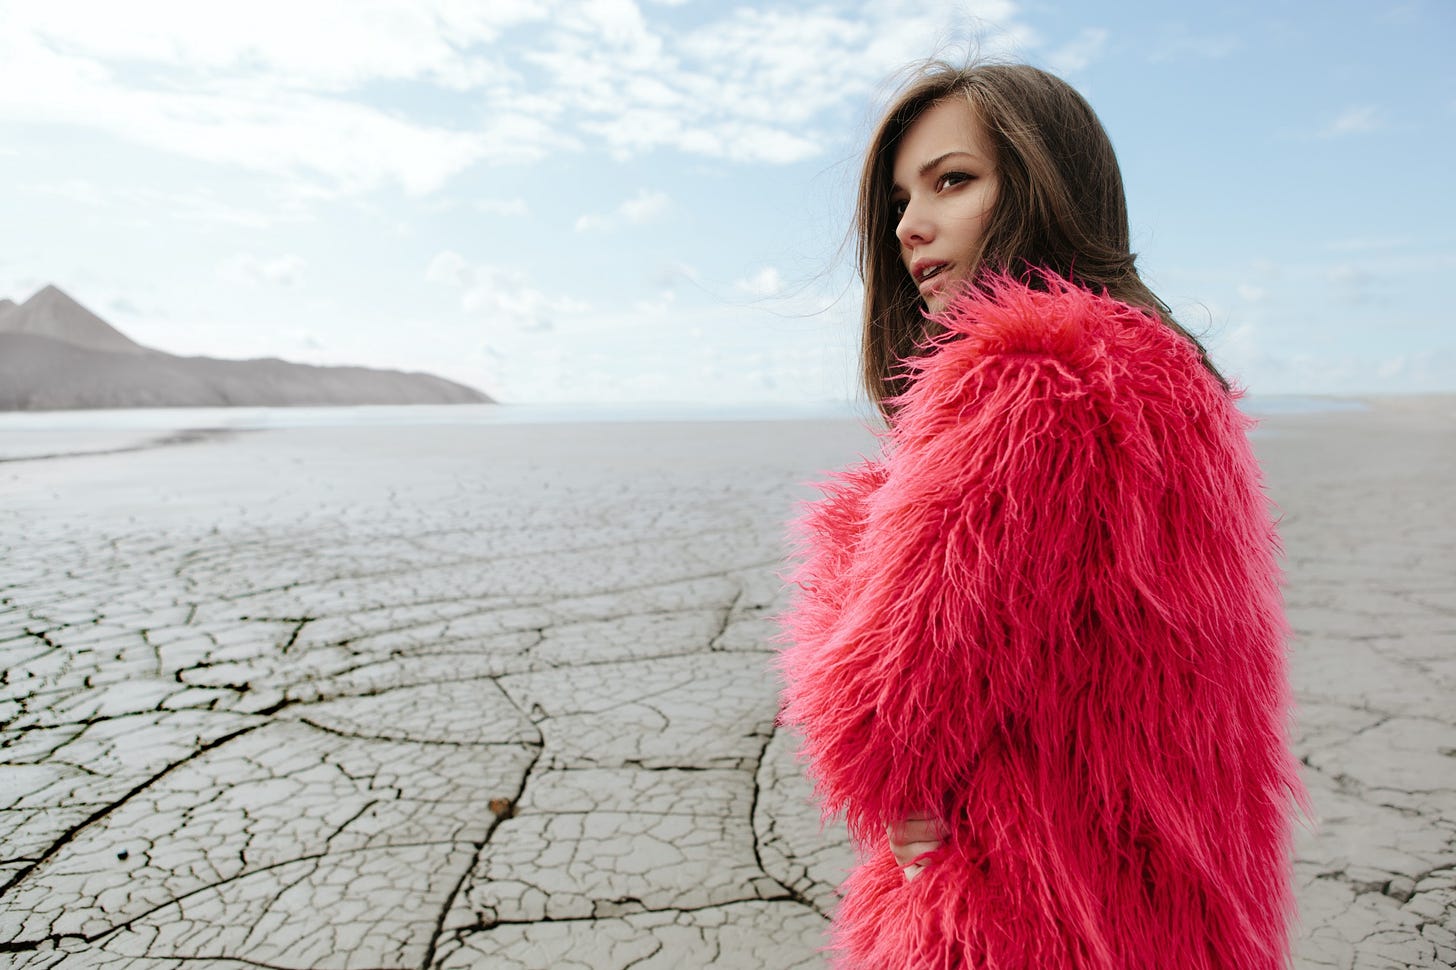 A woman in a shaggy pink coat stands against a desert backdrop.